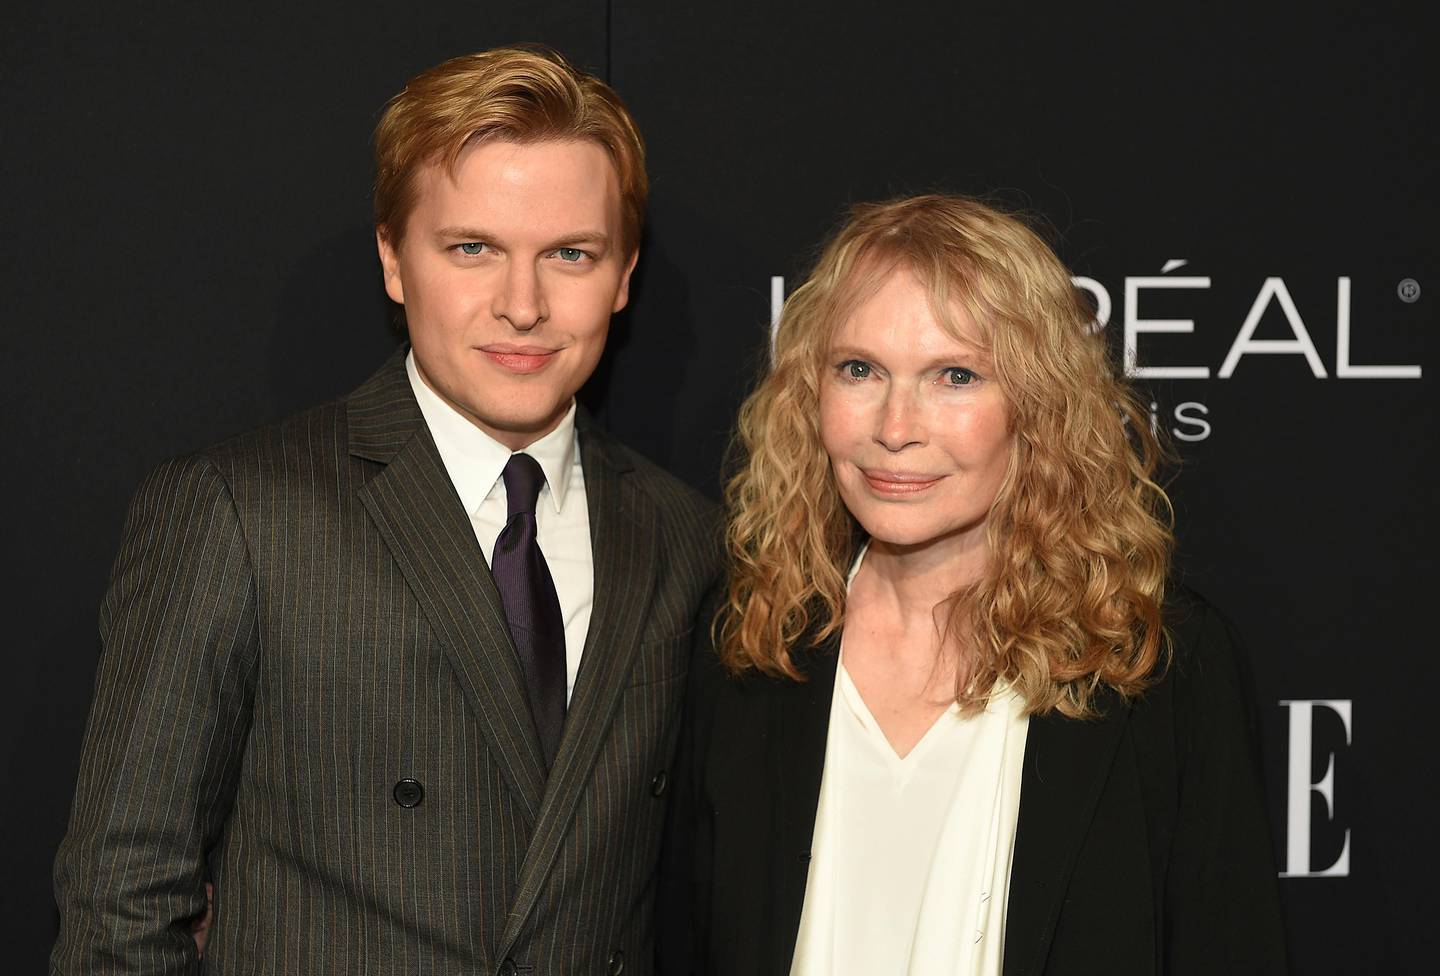 Actress Mia Farrow, right, recipient of the ELLE Legend Award, poses with her son journalist Ronan Farrow at the 25th Annual ELLE Women in Hollywood Celebration, Monday, Oct. 15, 2018, in Los Angeles. (Photo by Chris Pizzello/Invision/AP)